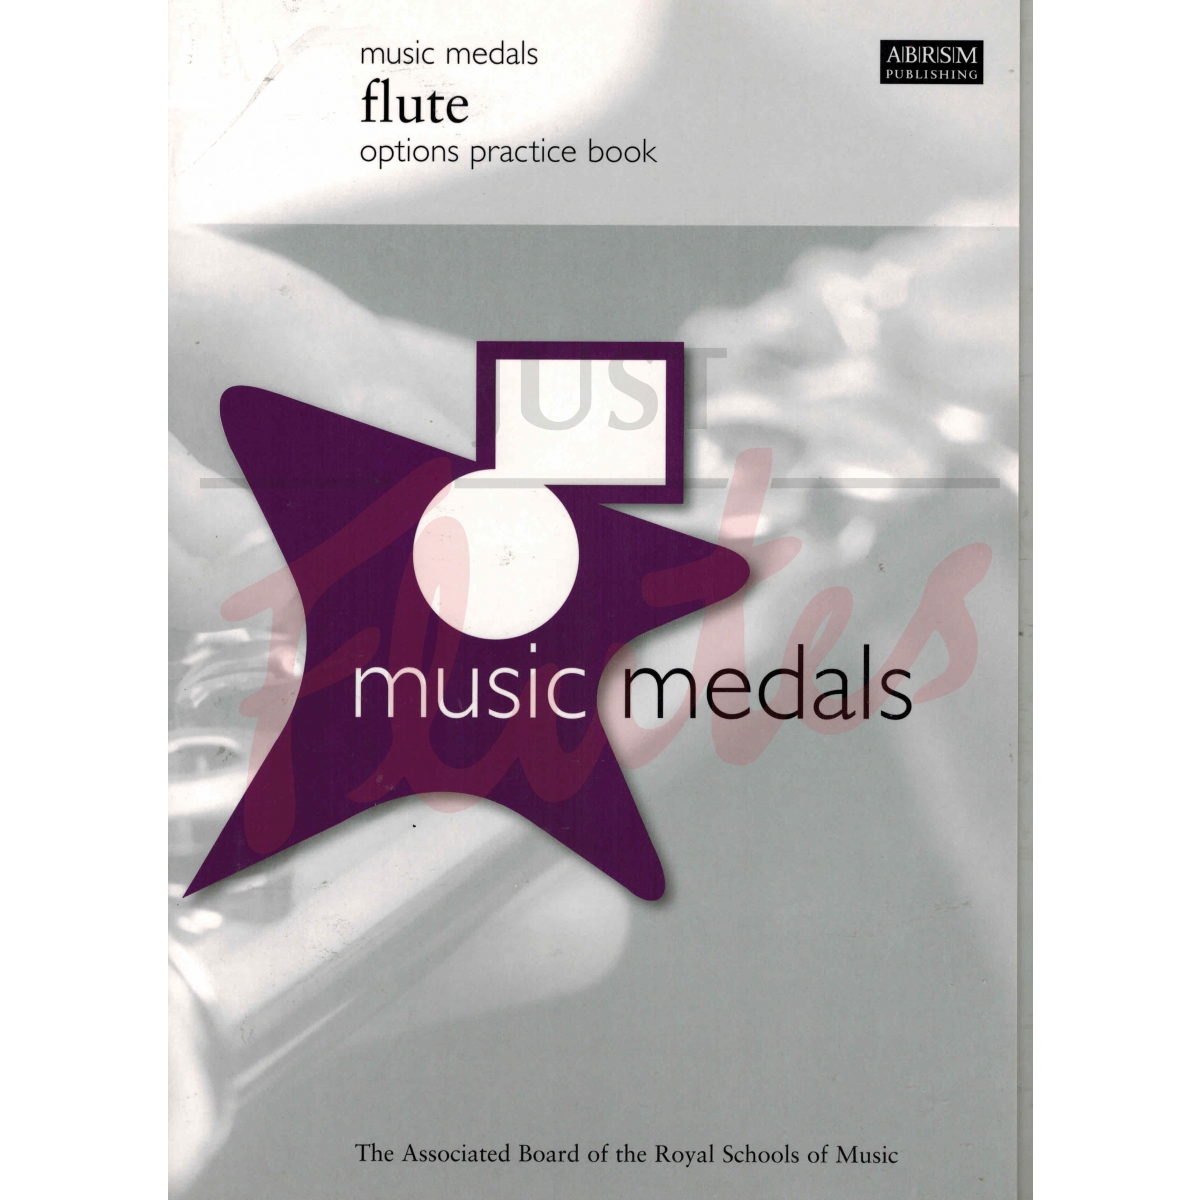 Music Medals Flute - Options Practice Book